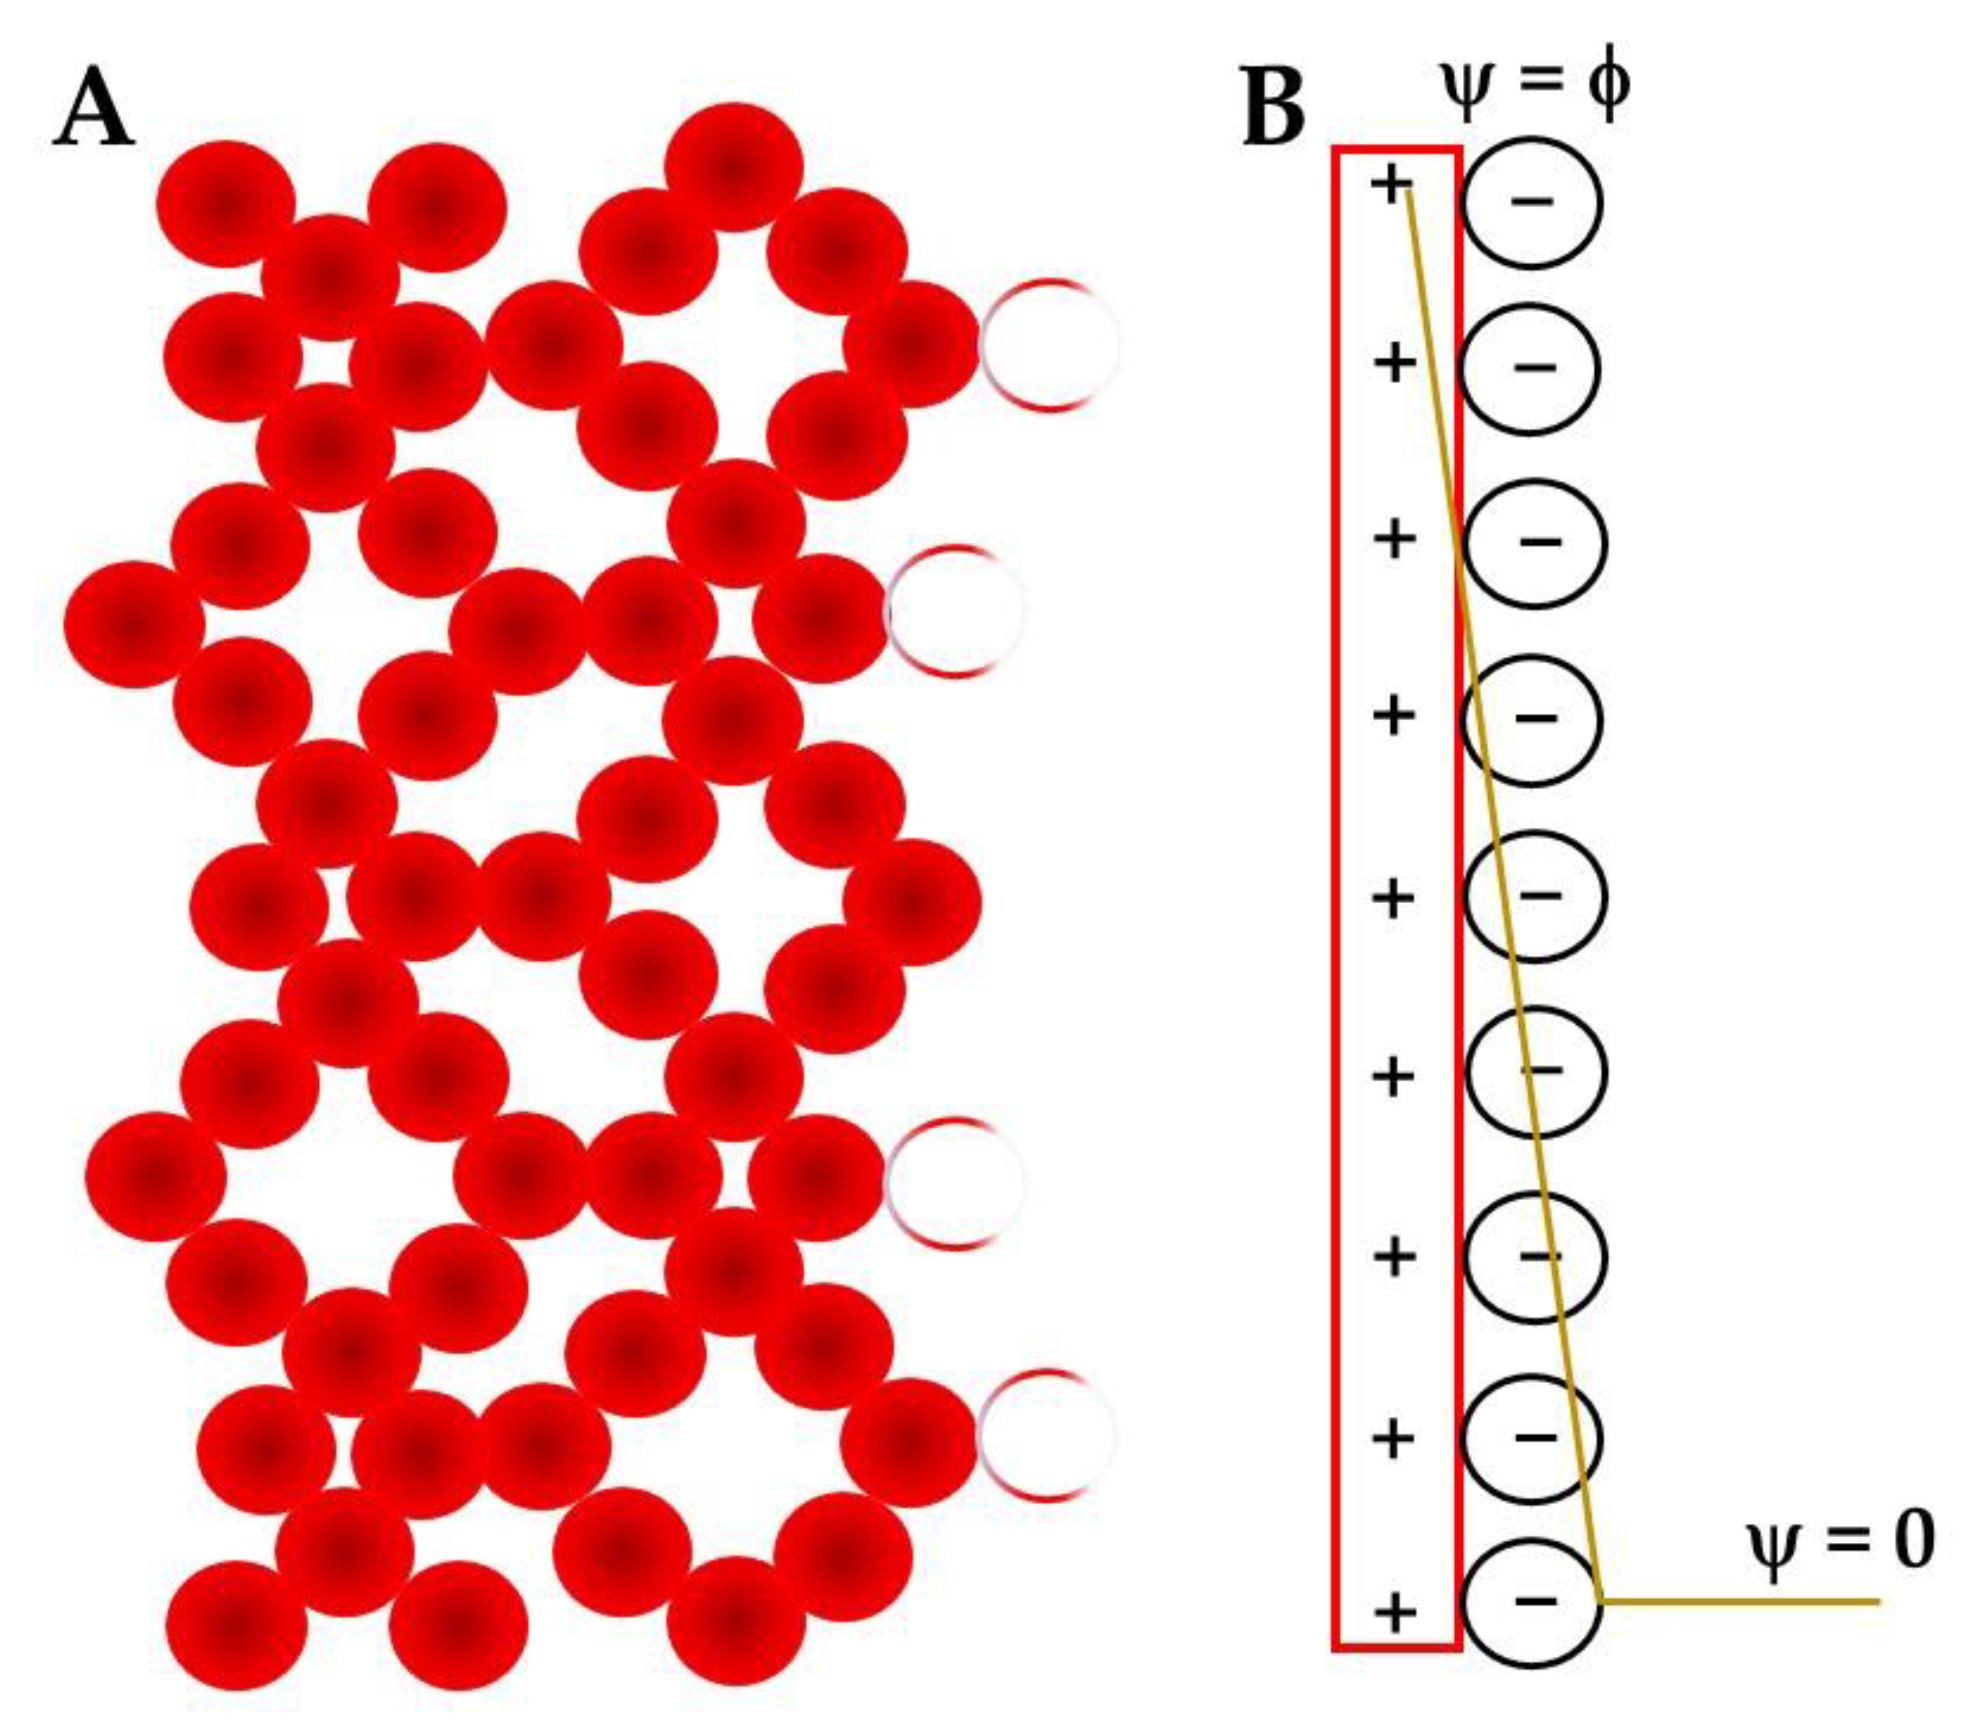 Unravelling the electrochemical double layer by direct probing of